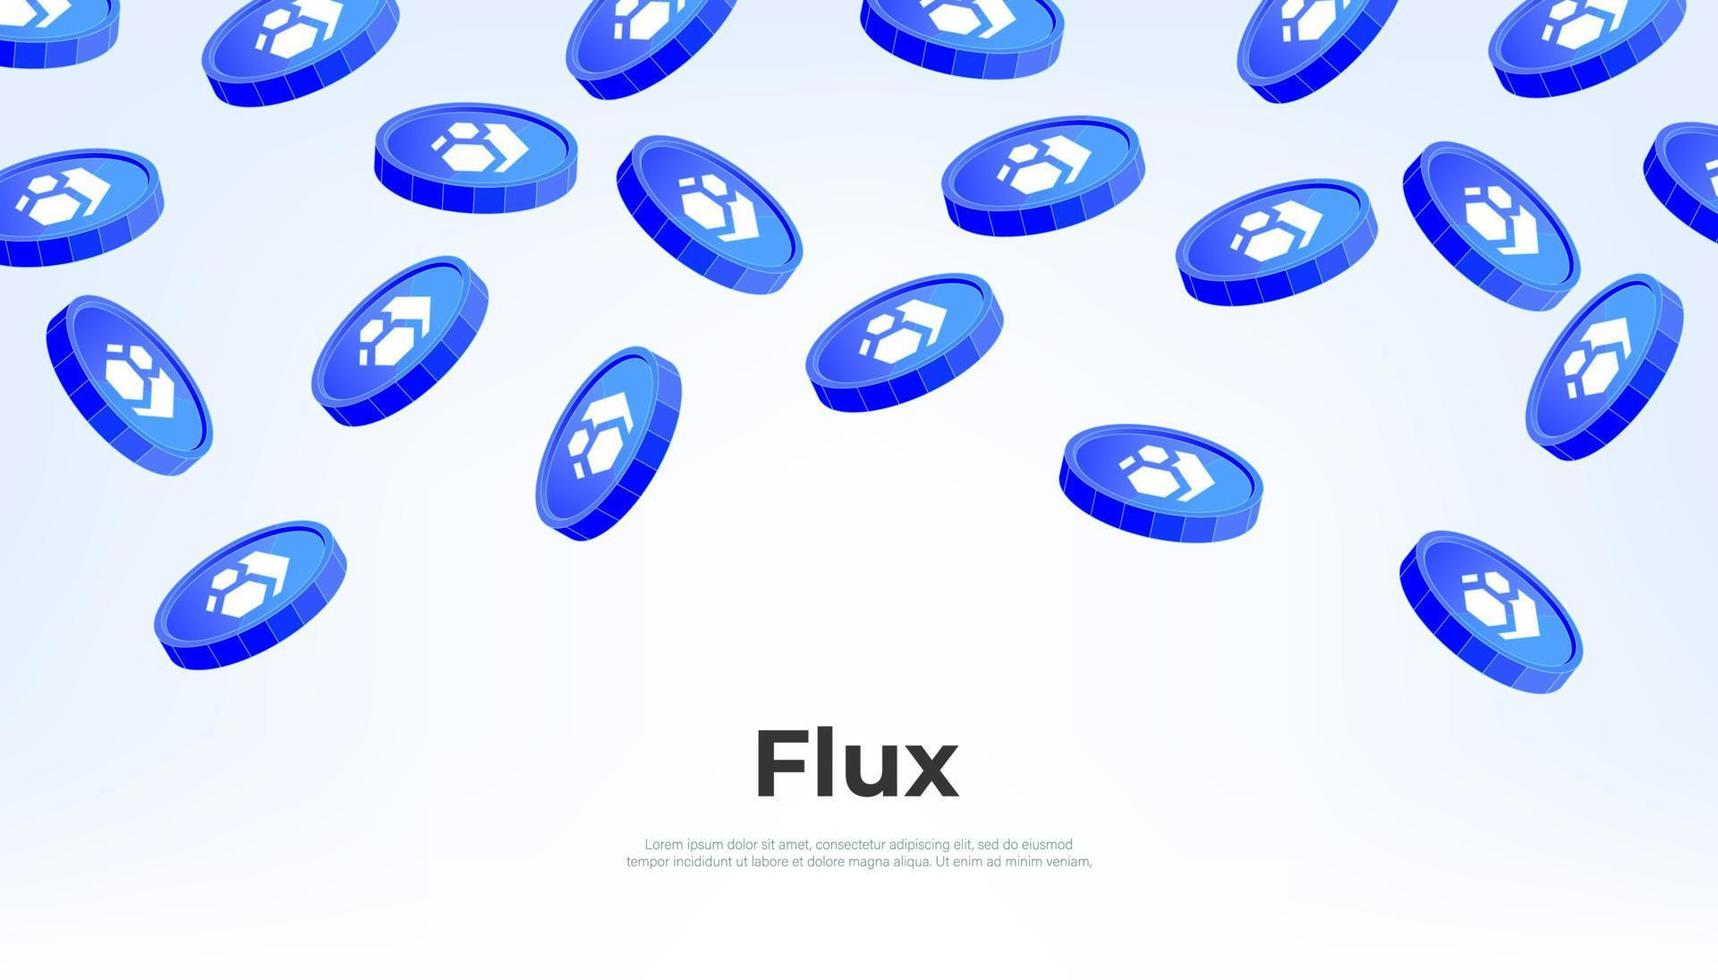 Flux coin falling from the sky. Flux cryptocurrency concept banner background. vector